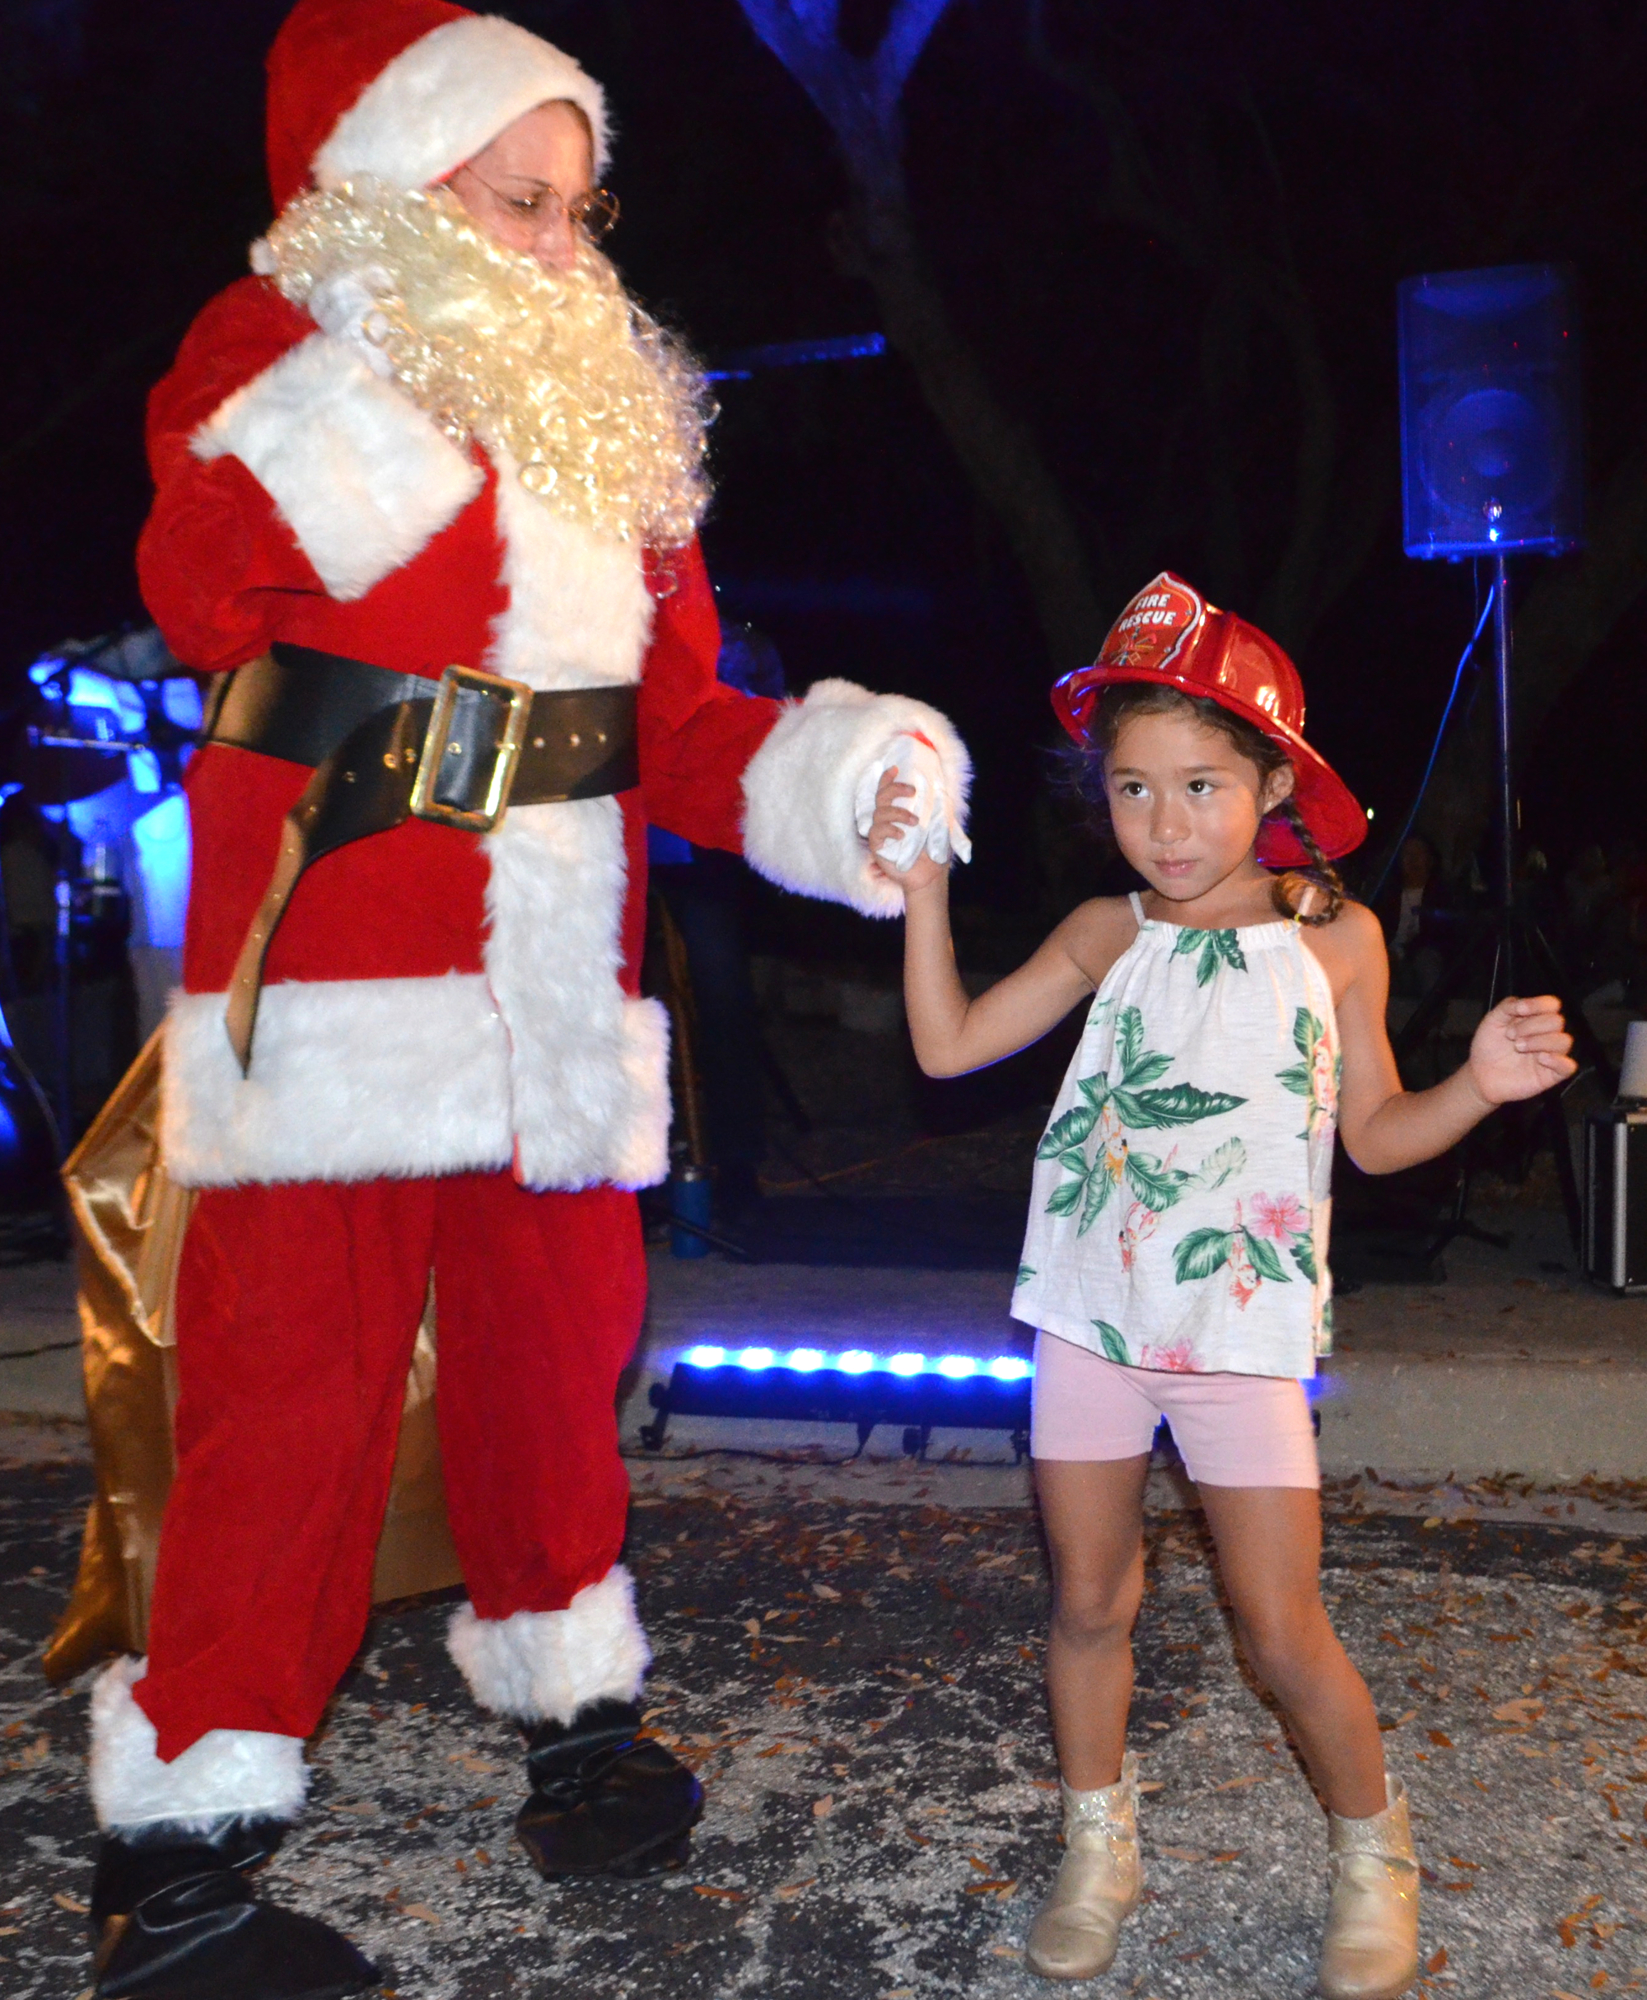 Sloane Hardy, 4, got the first dance with Santa on Saturday night. Sloane, of Carlsbad, Calif., was visiting relatives over the Thanksgiving holiday.